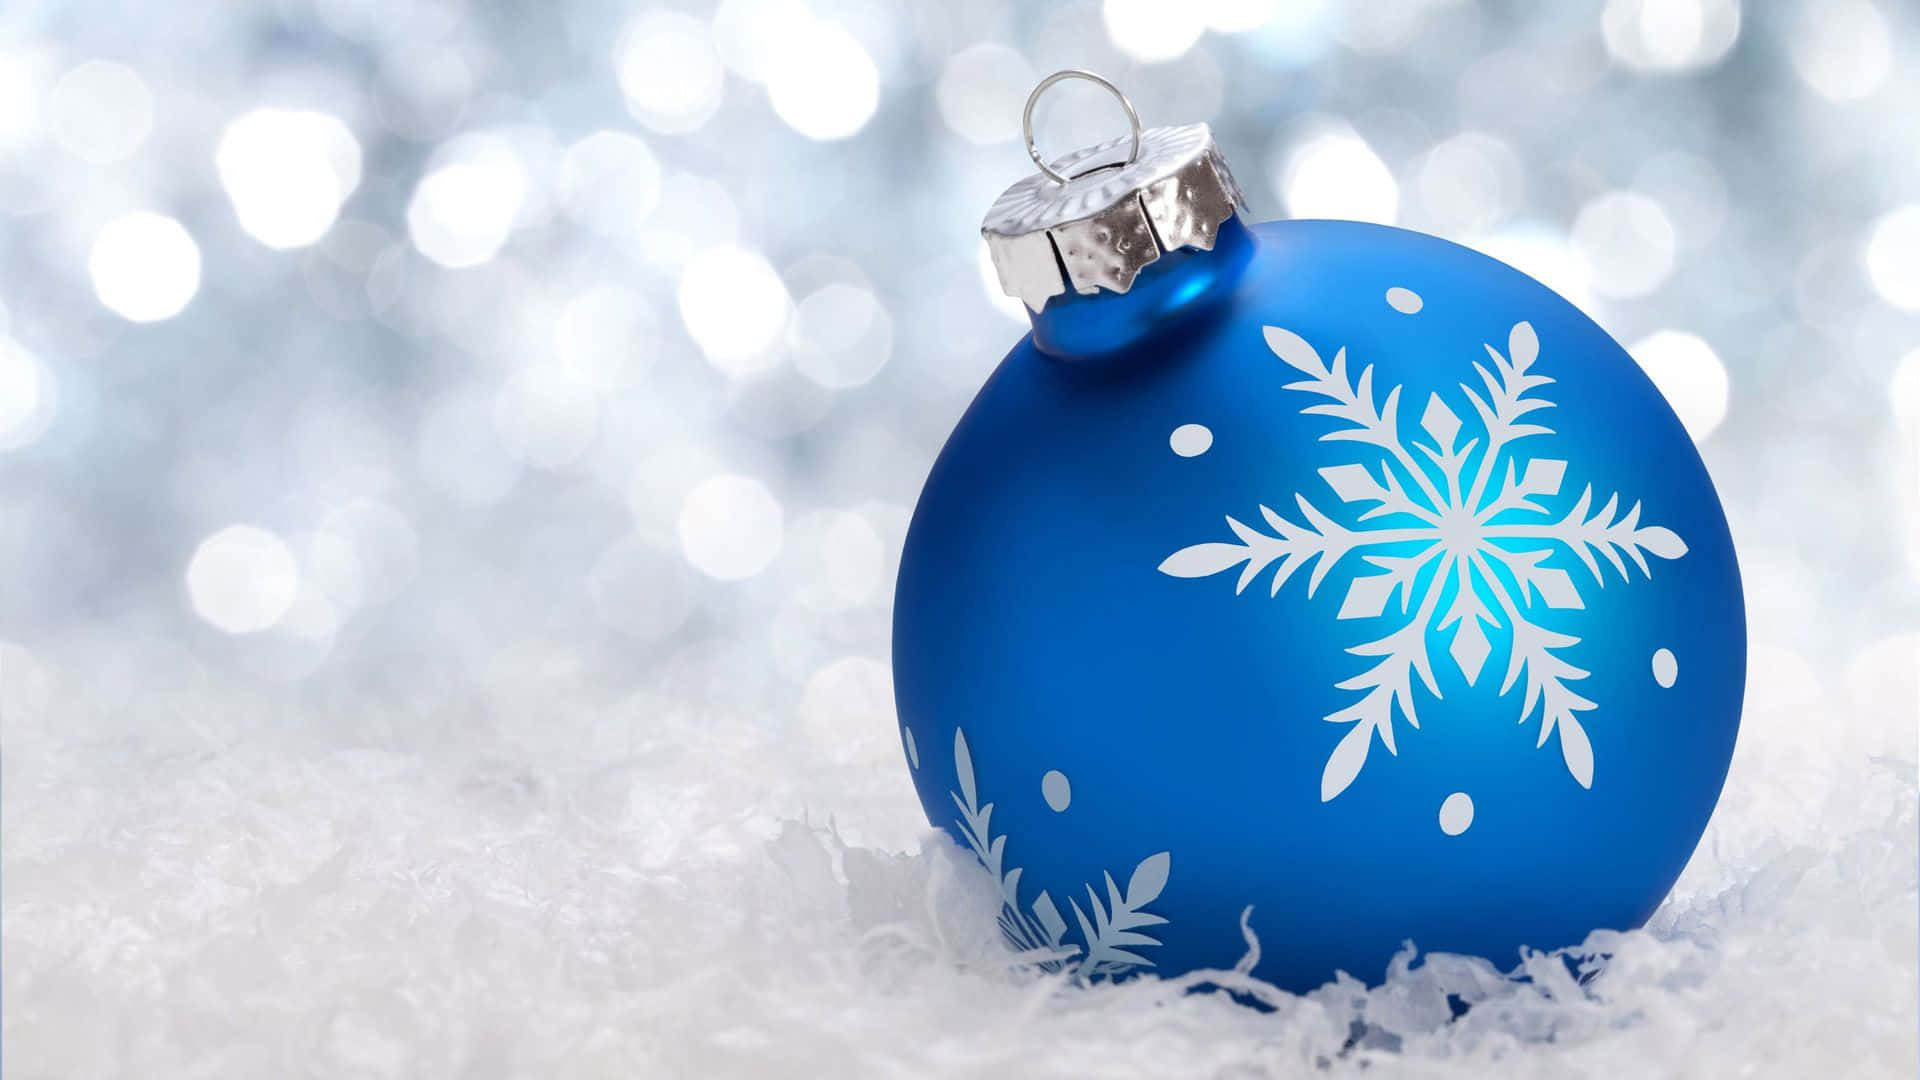 A Blue Christmas Ball With Snowflakes On It Wallpaper